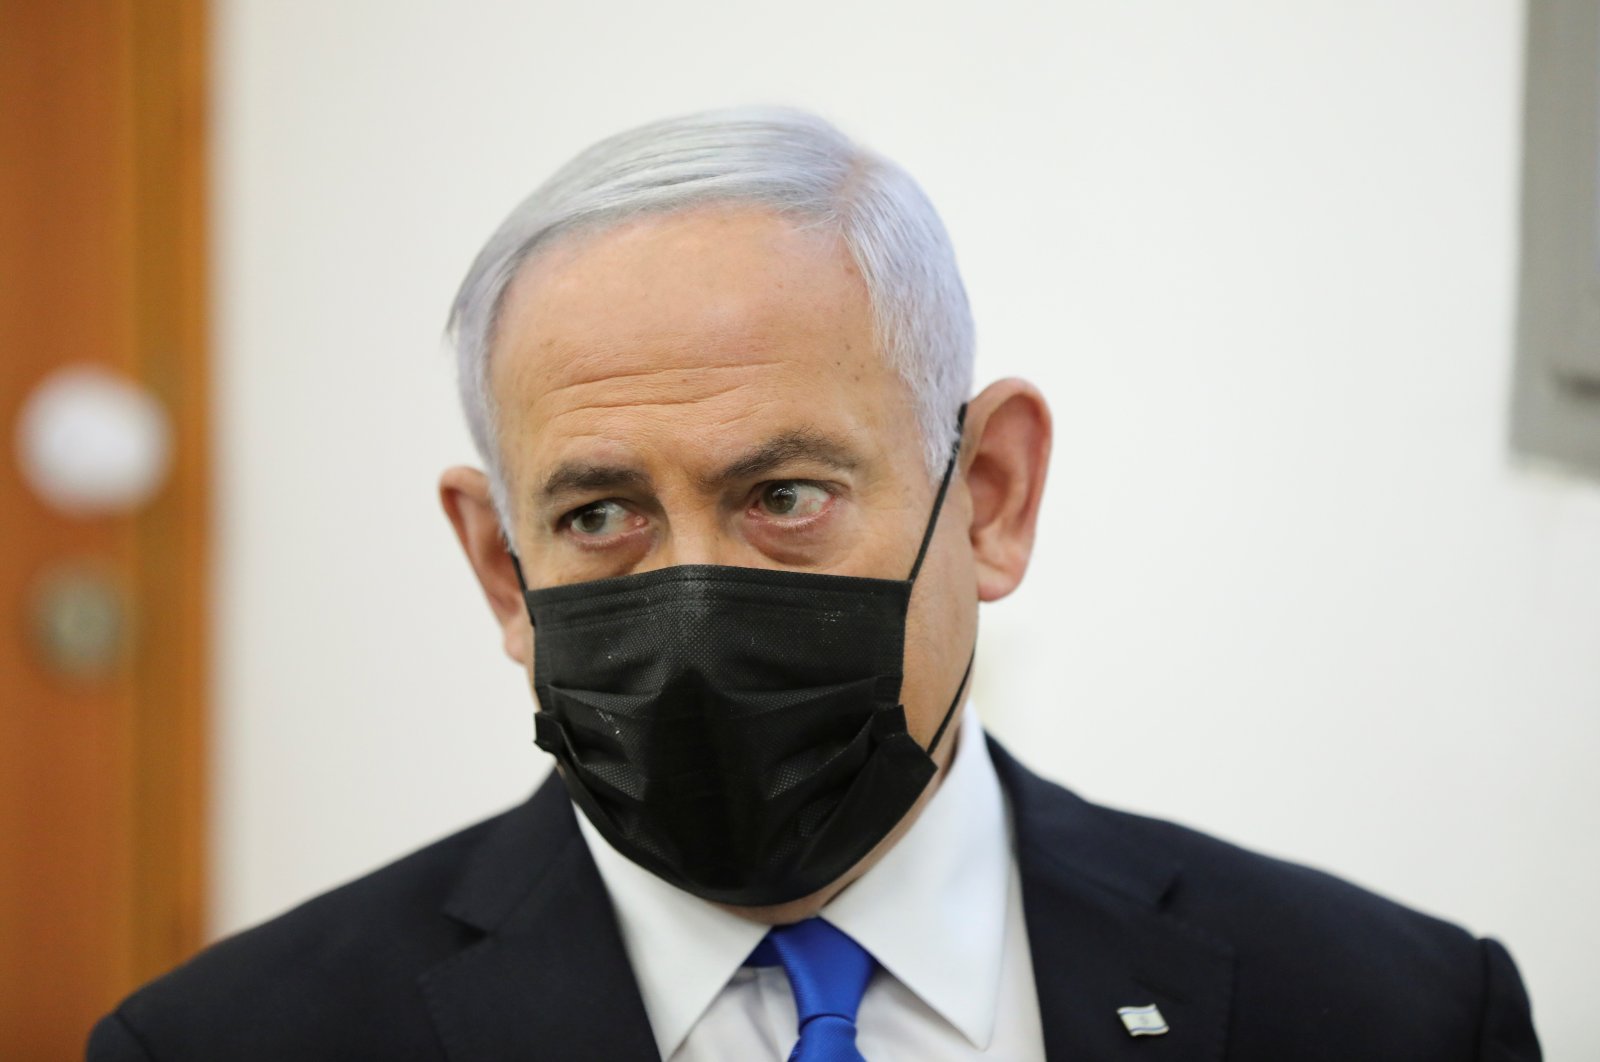 Israeli Prime Minister Benjamin Netanyahu, wearing a face mask, looks on as his corruption trial resumes, at Jerusalem's District Court, Israel, April 5, 2021. (Abir Sultan/Pool via REUTERS)